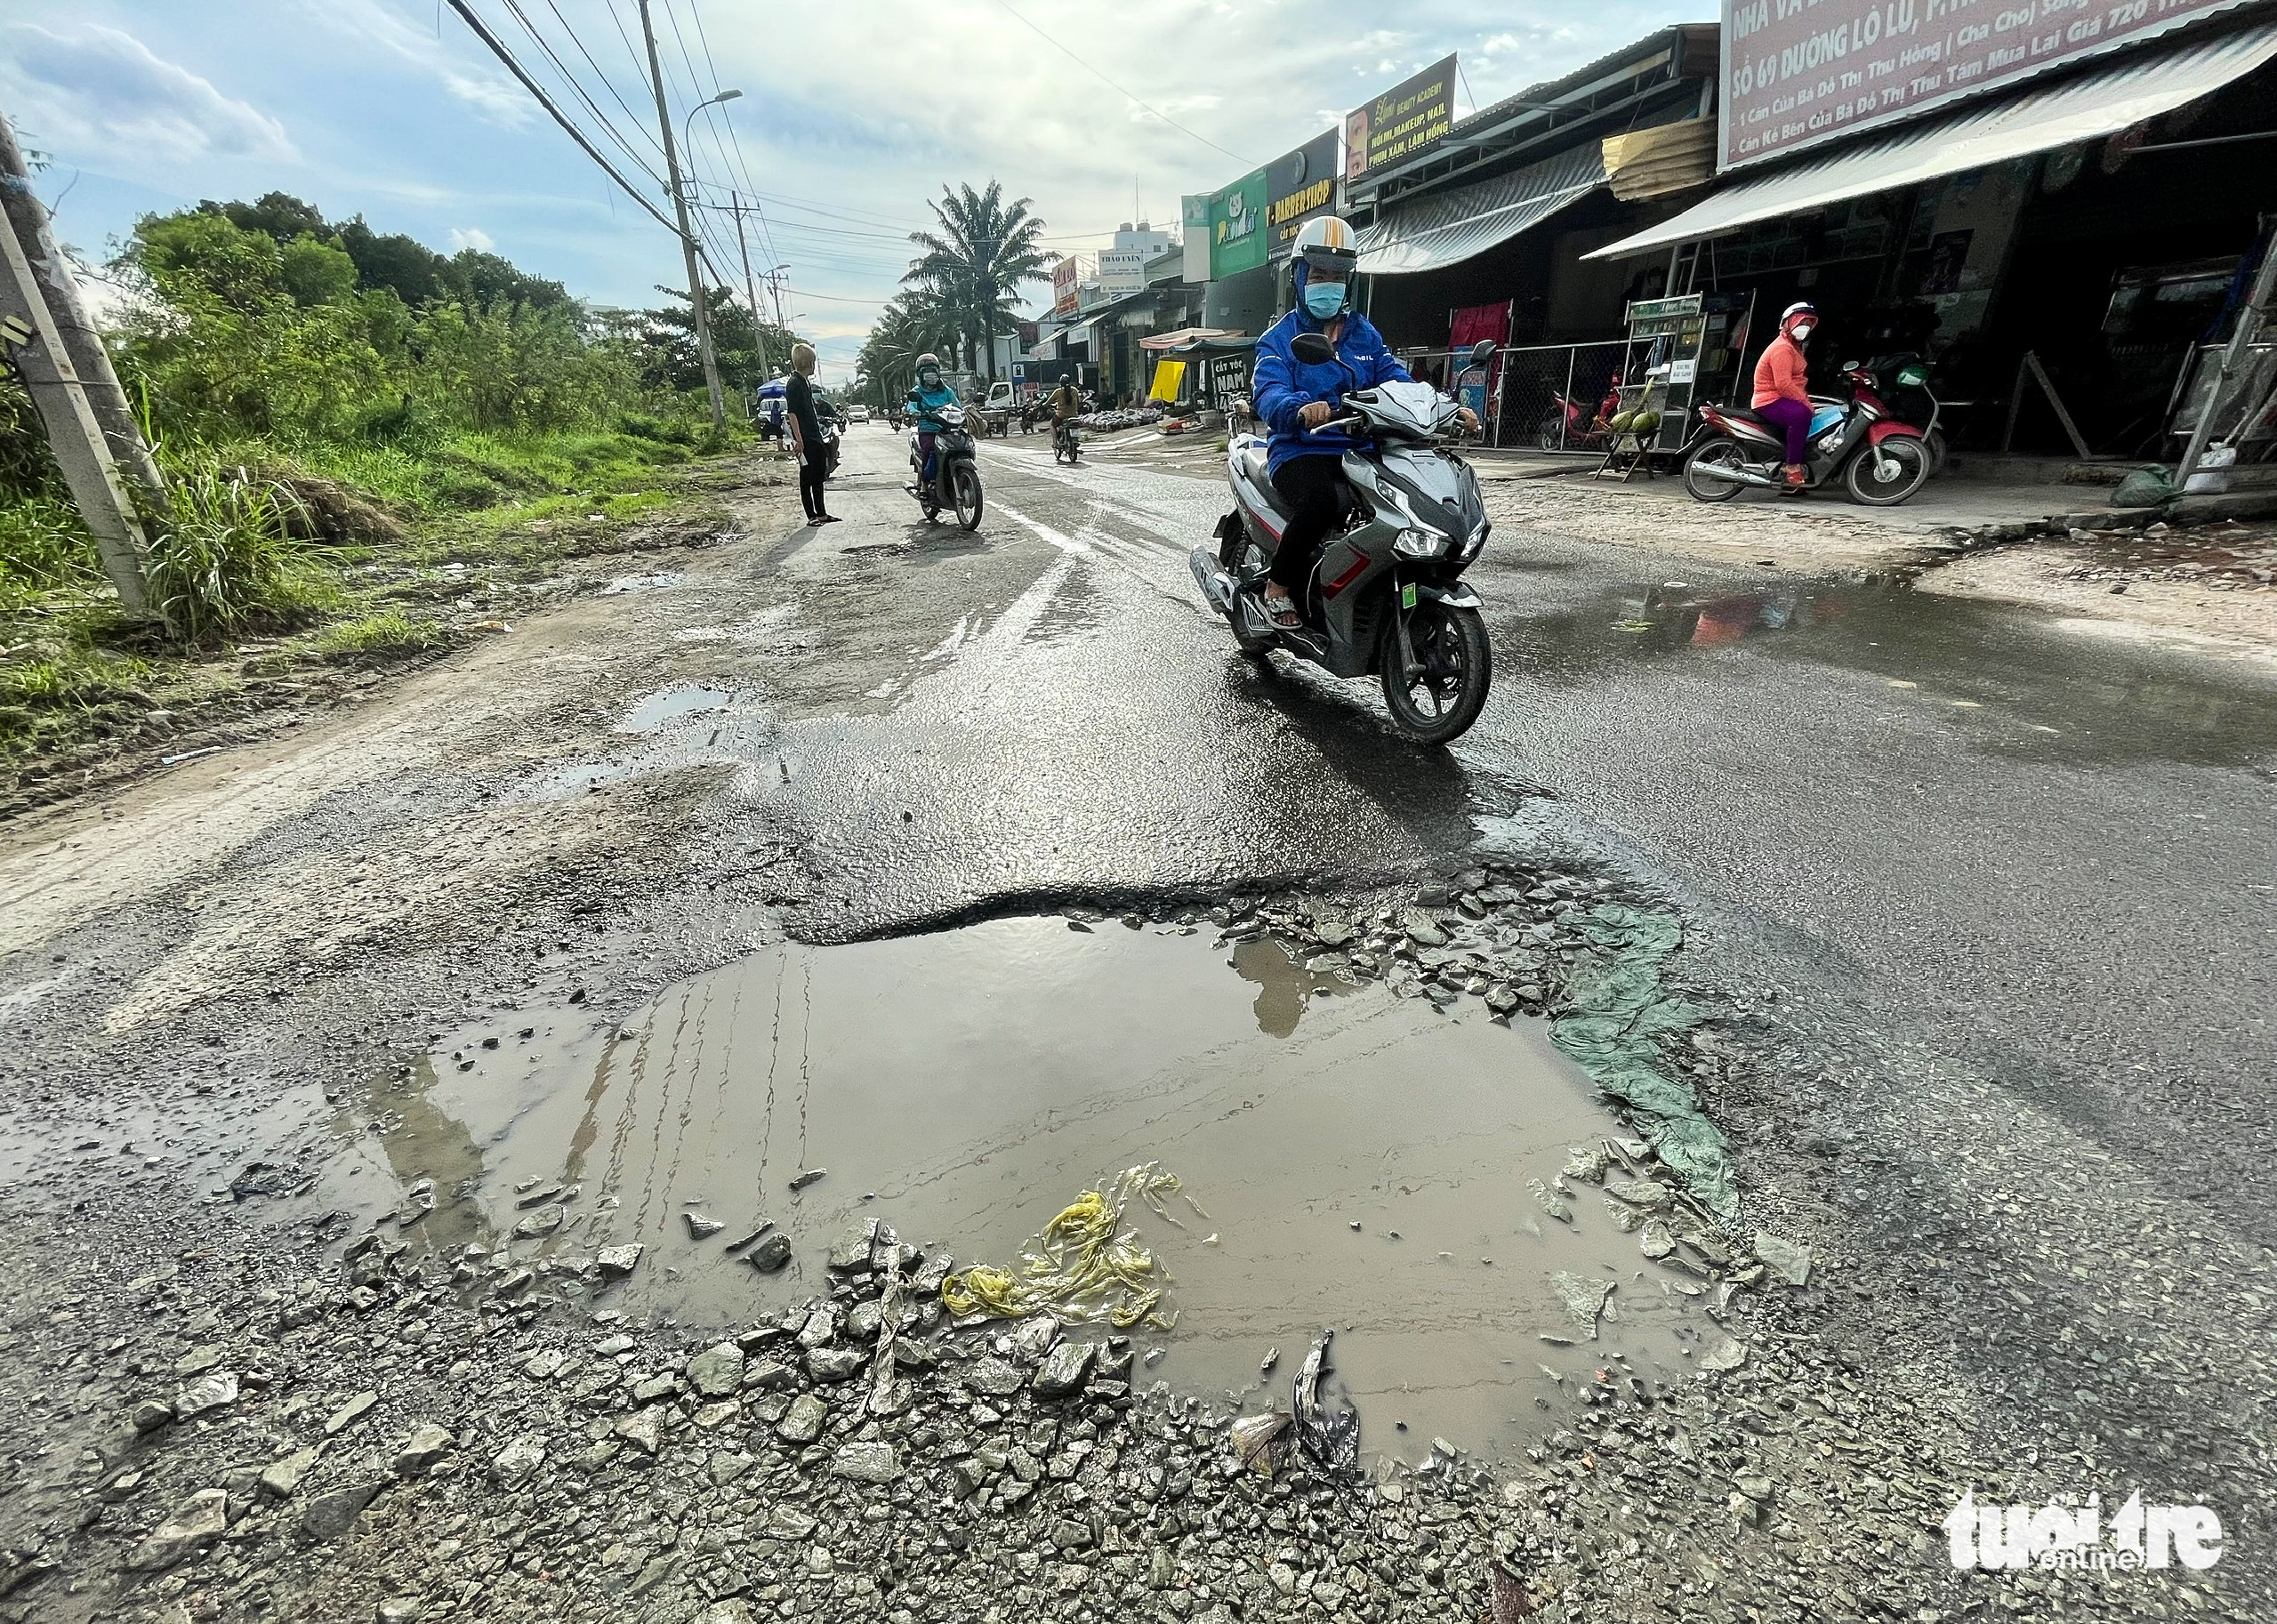 A large pothole is filled with water on Lo Lu Street in Thu Duc City, Ho Chi Minh City. Photo: Chau Tuan / Tuoi Tre